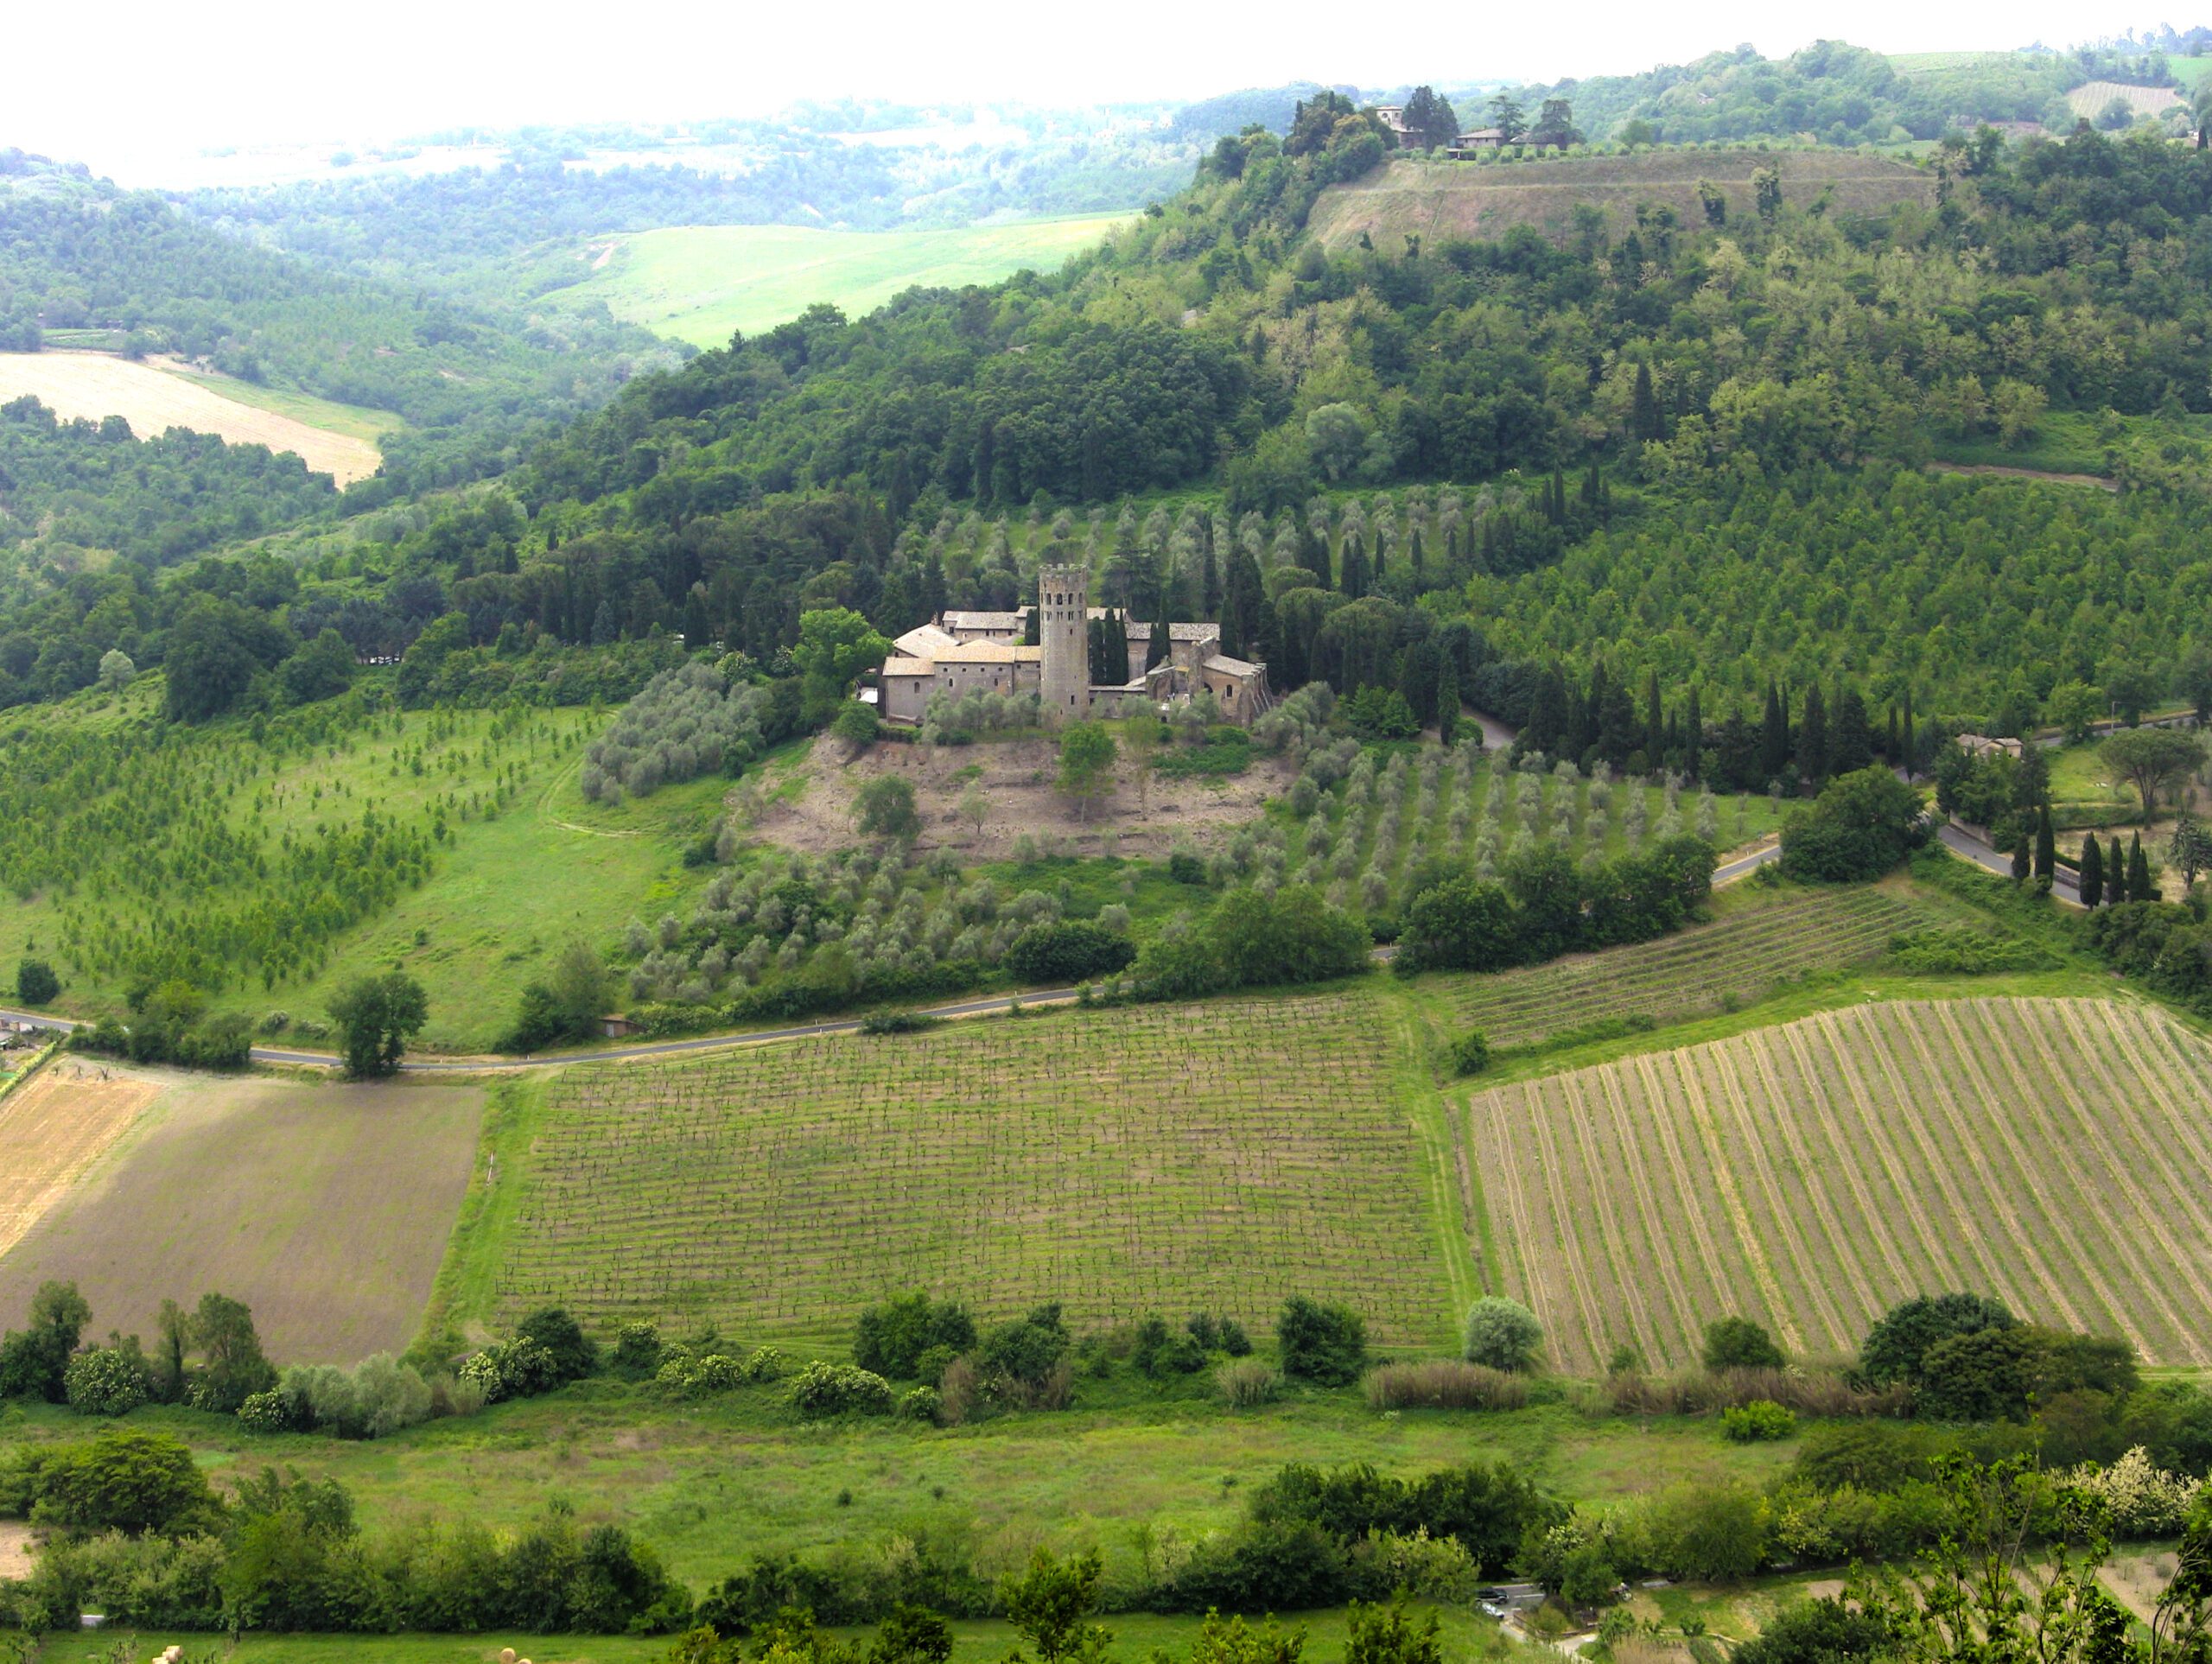 A hill town in the region of Tuscan & Umbrian Countryside